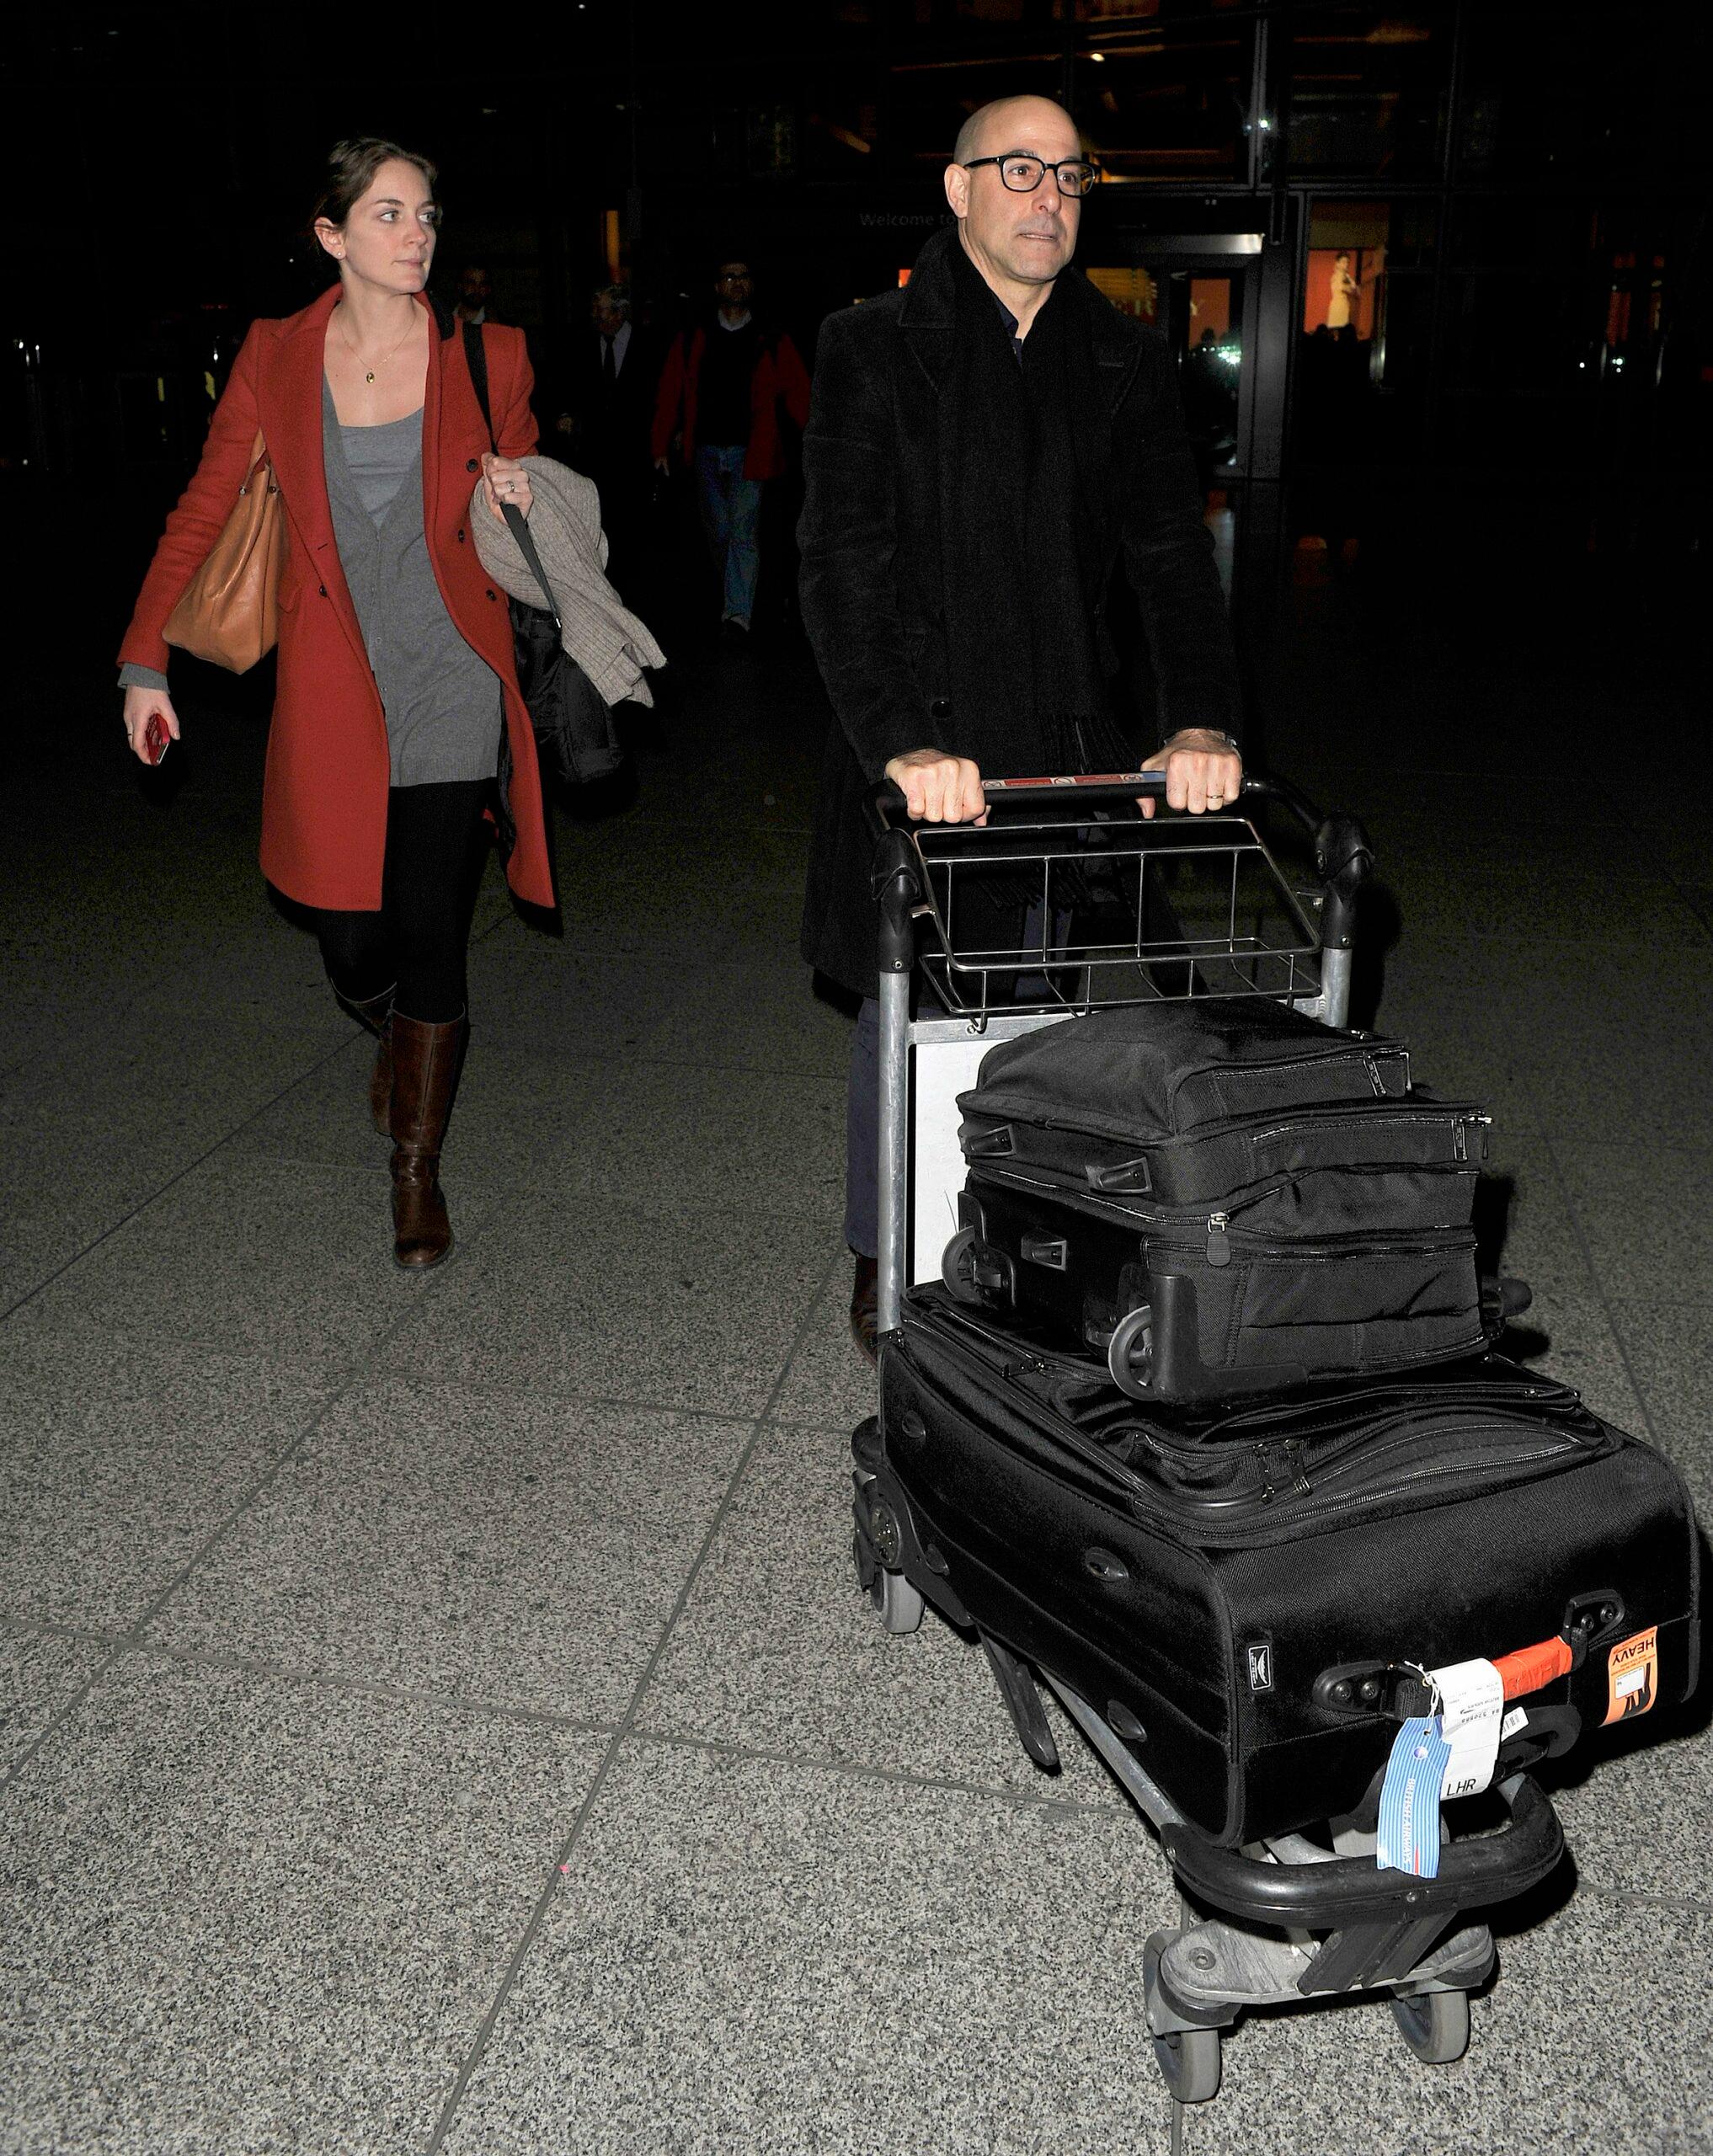 Stanley Tucci and his wife Felicity Blunt arriving into Heathrow Airport